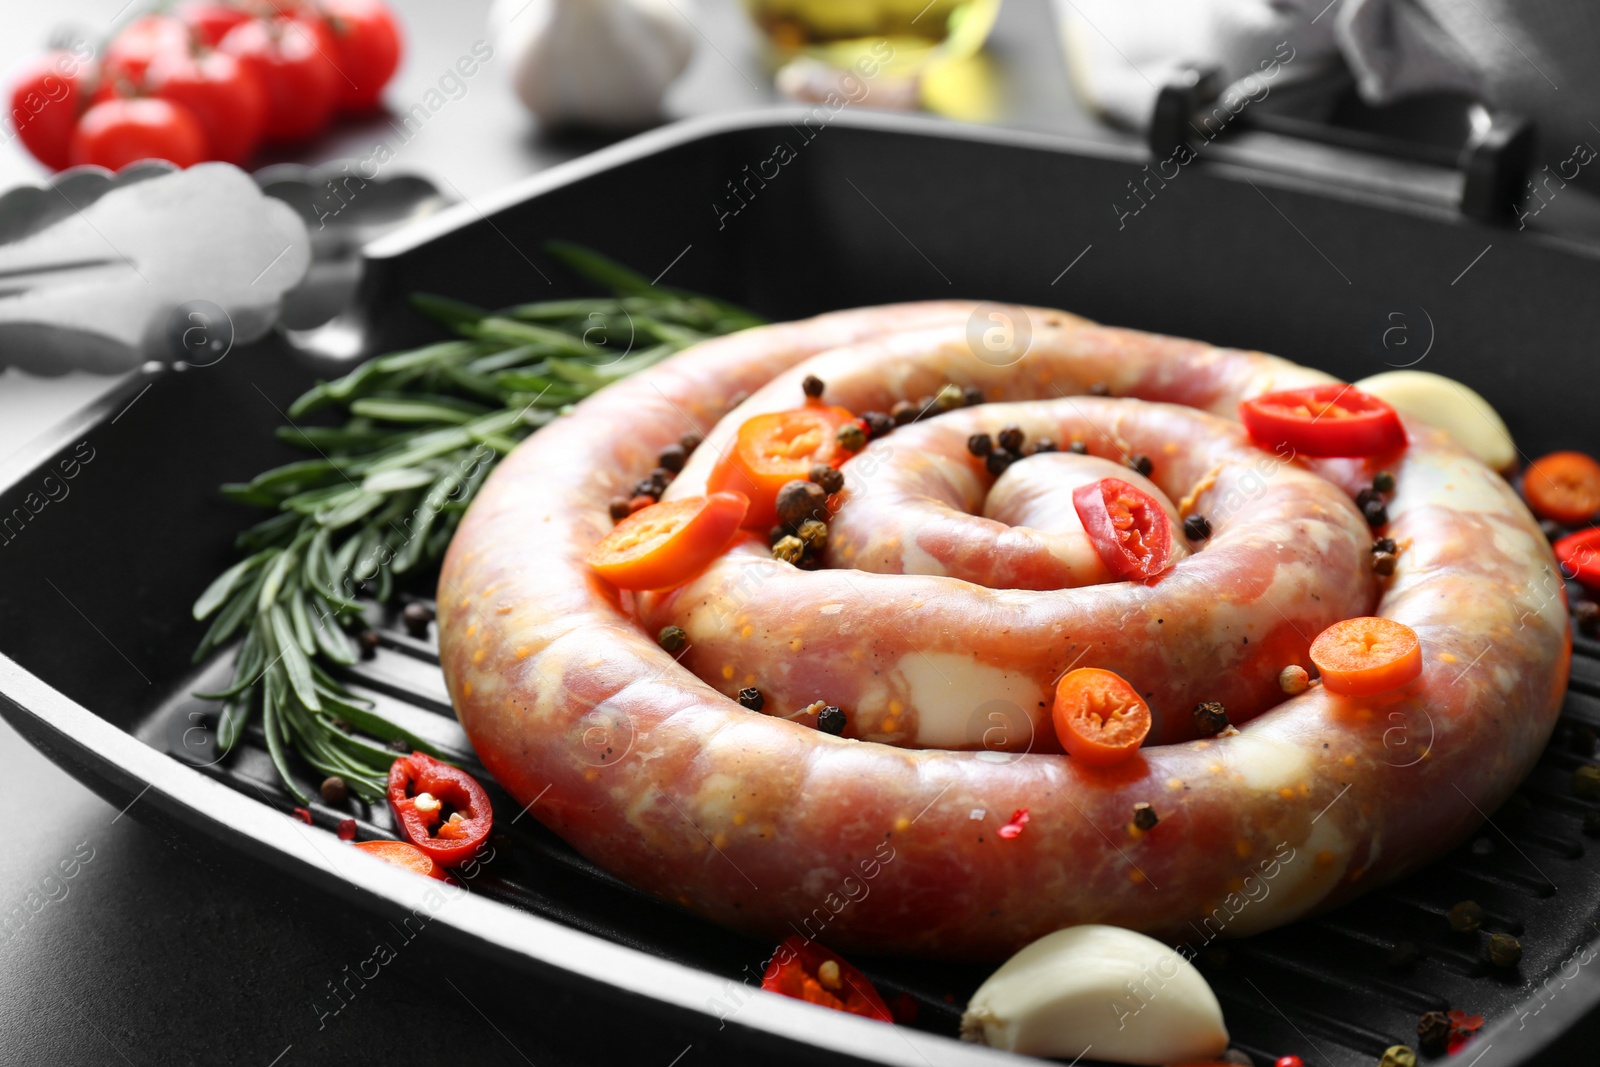 Photo of Pan with raw homemade sausage, chili pepper, garlic and rosemary on grey table, closeup